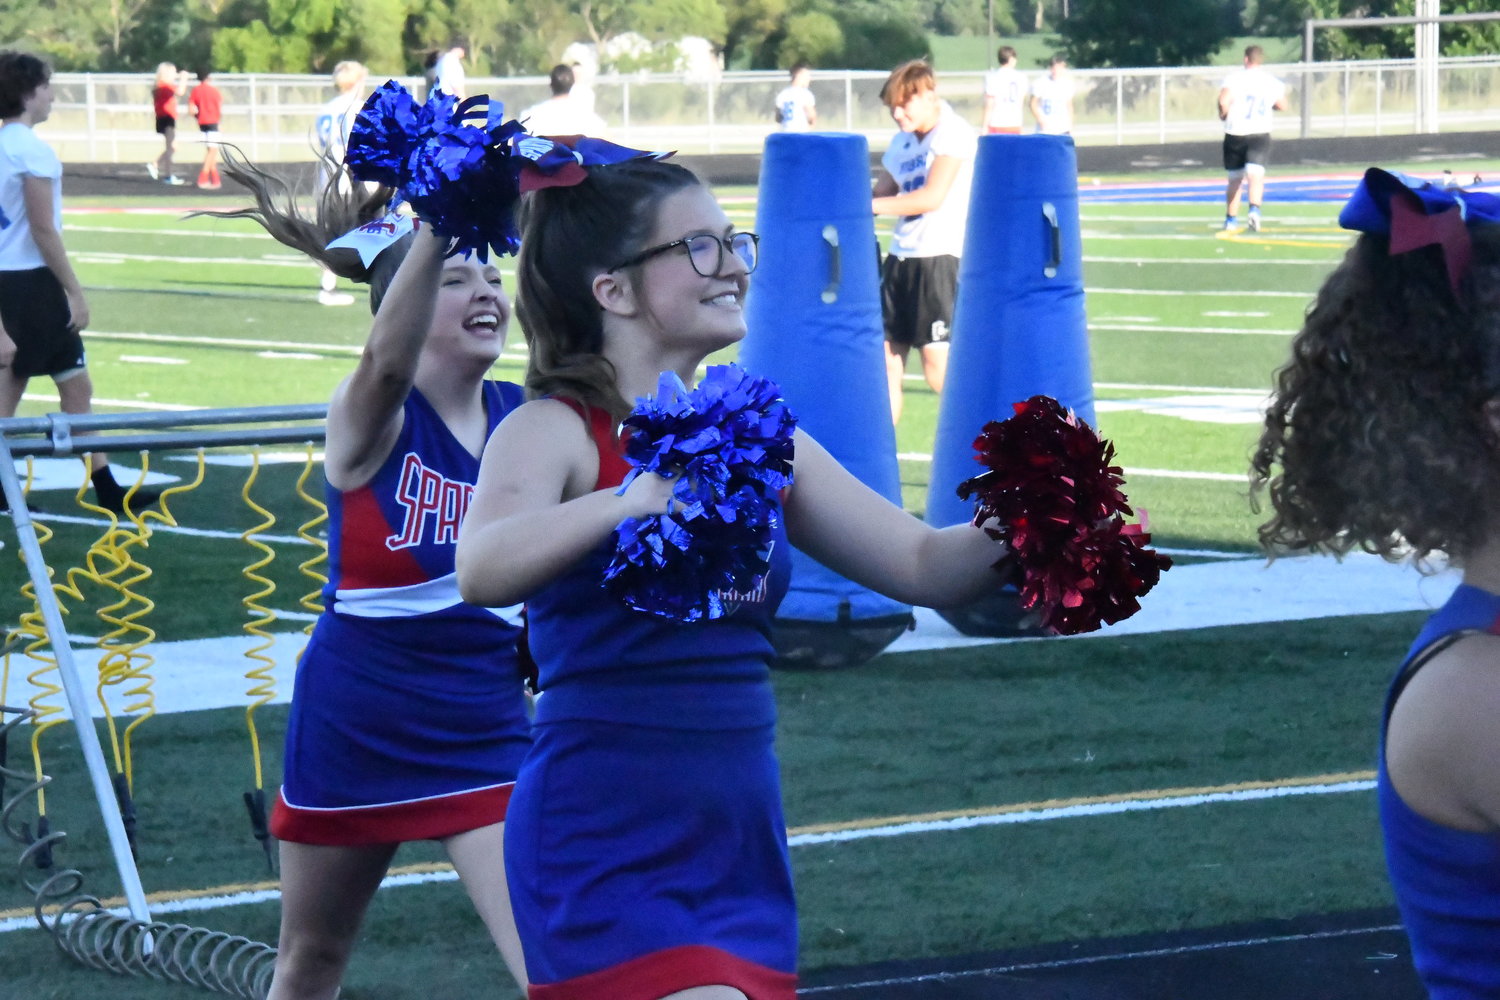 Moberly High School cheerleader Camryn Crist has been named a team captain for the 2022-23 academic year.